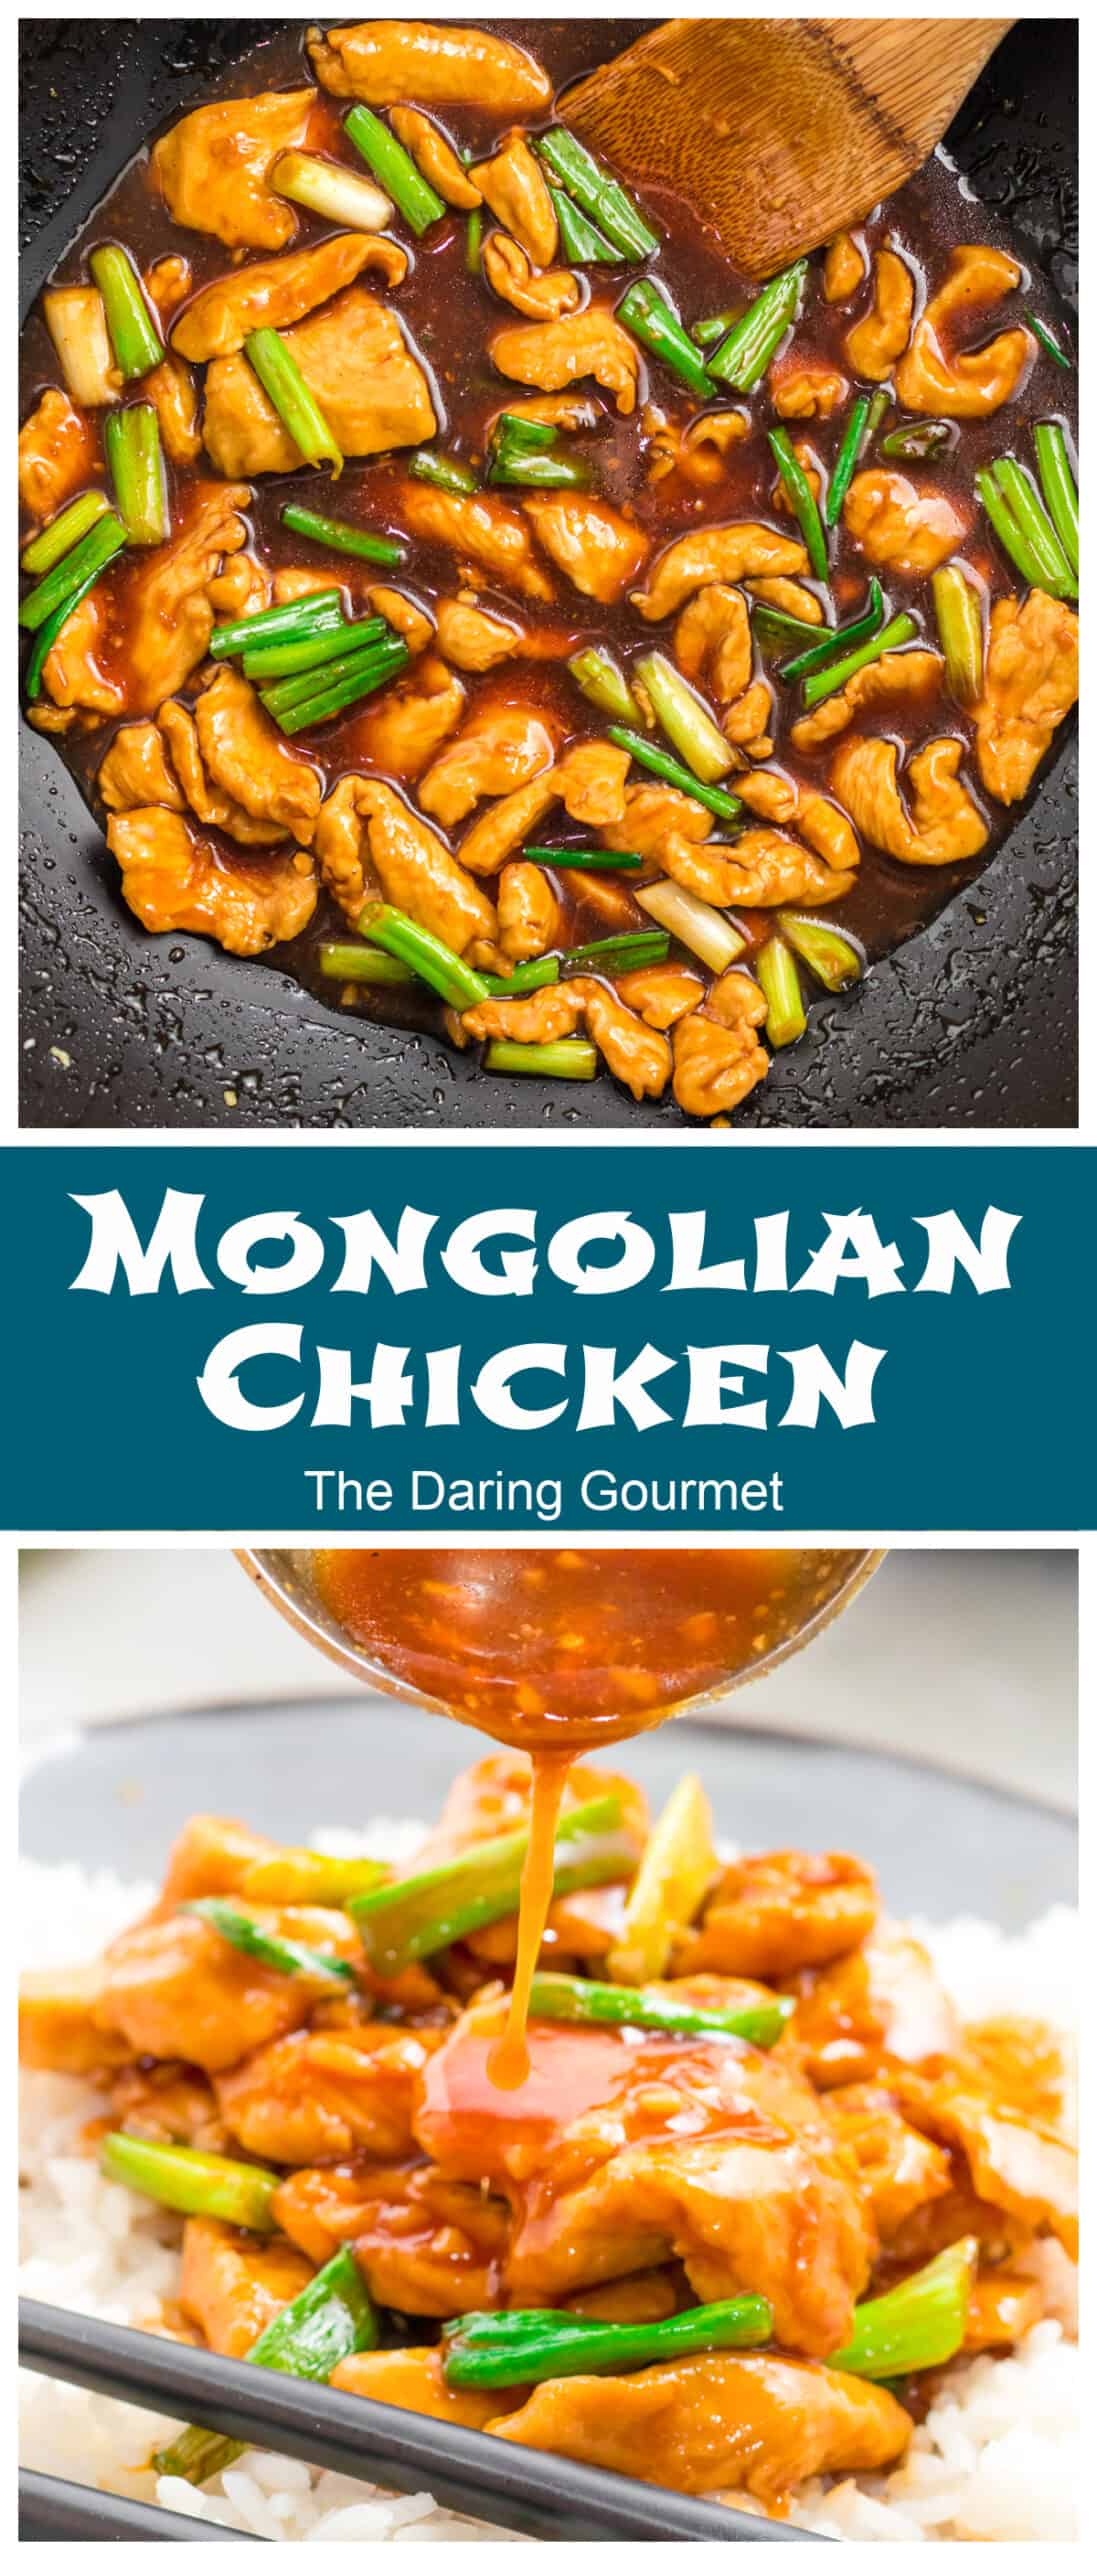 mongolian chicken recipe best takeout fast food restaurant copycat green onions fast quick easy